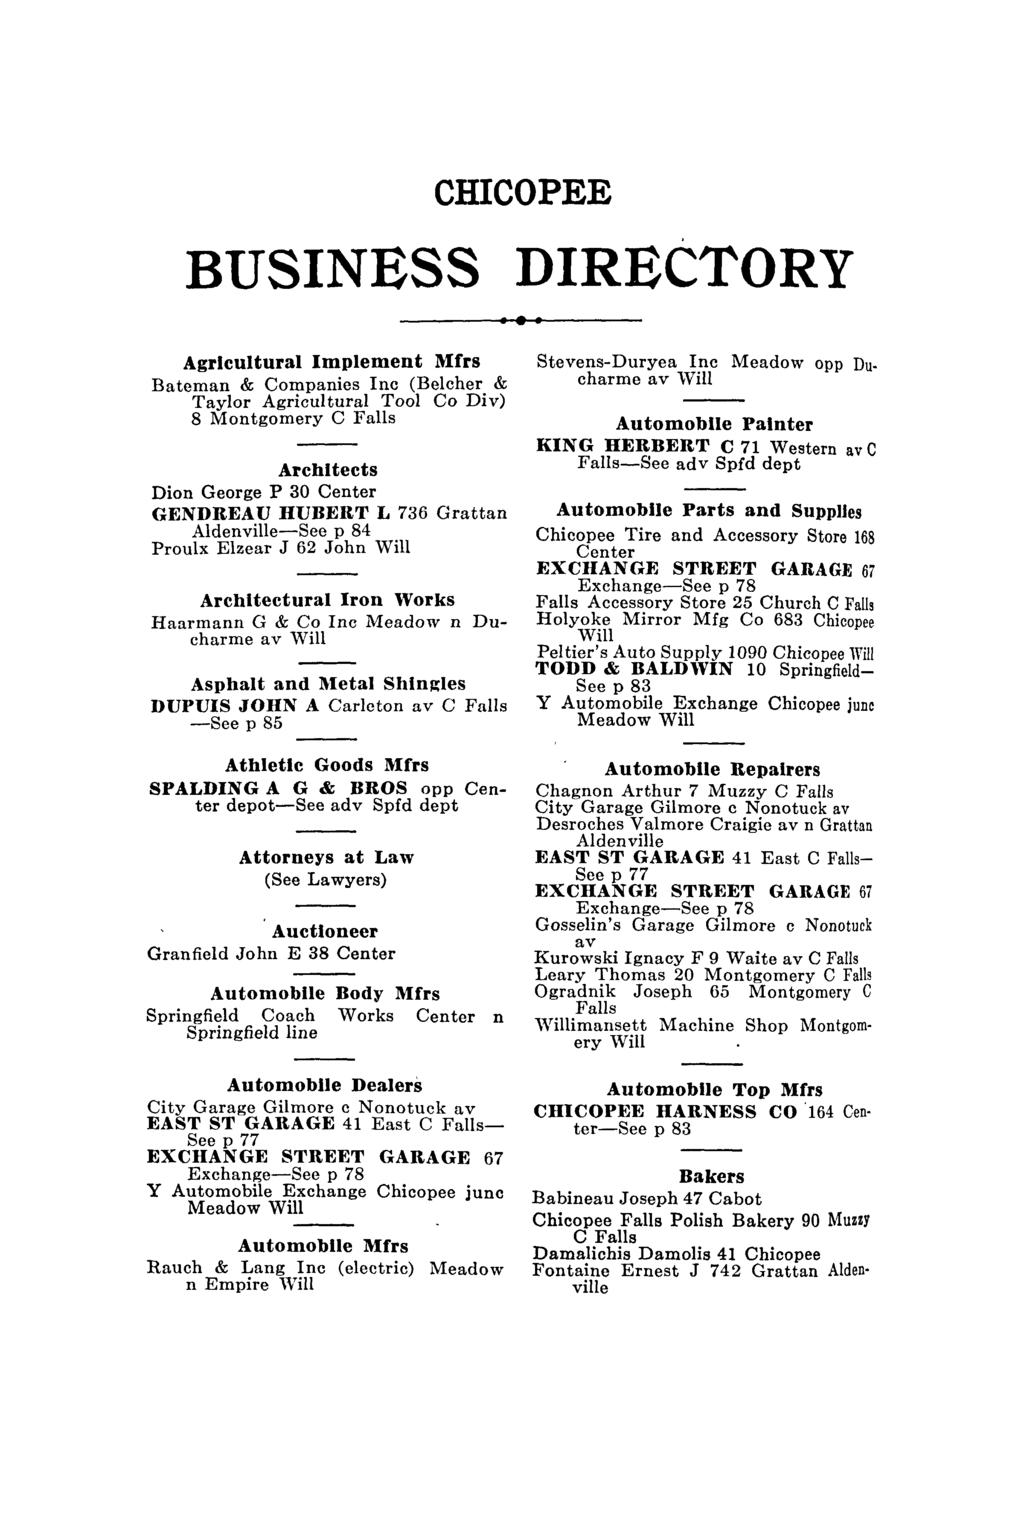 CHICOPEE BUSINESS DIRECTORY Agricultural Implement Mfrs Bateman & Companies Inc (Belcher & Taylor Agricultural Tool Co Div) 8 Montgomery C Architects Dion George P 30 Center GENDREAU HUBERT L 736